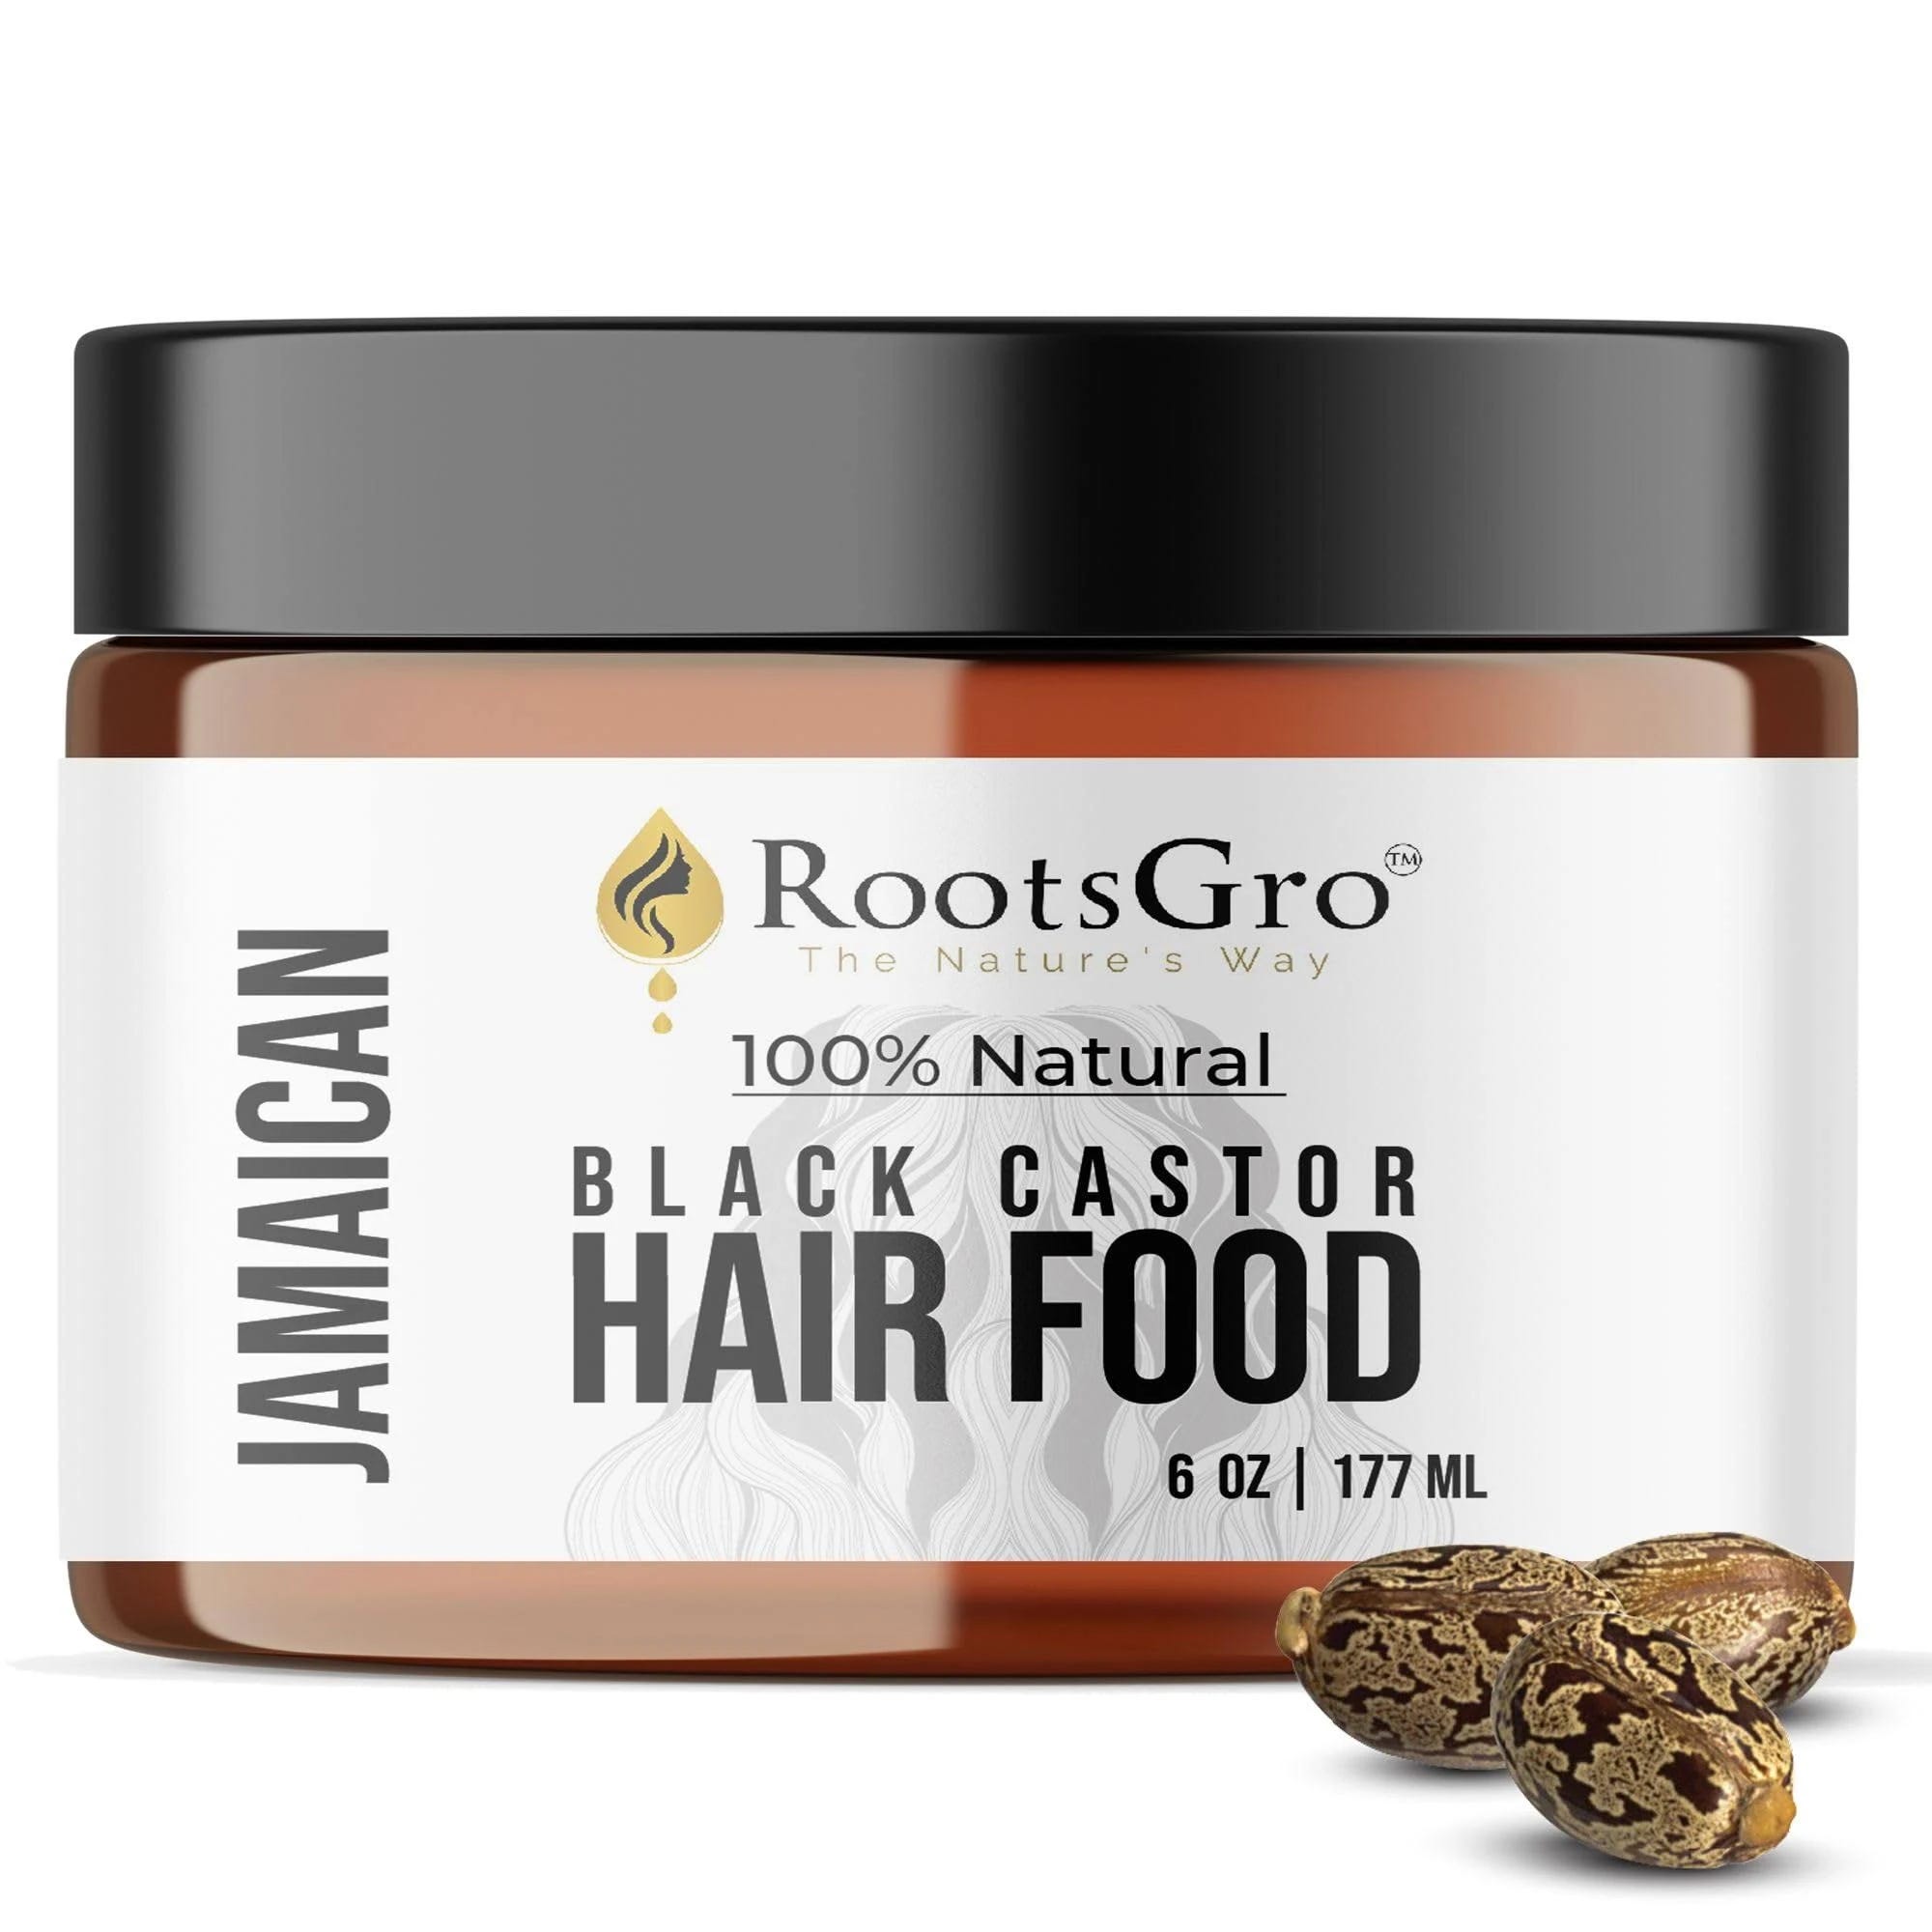 Revive Your Locks with RootsGro Jamaican Black Castor Hair Food | Image